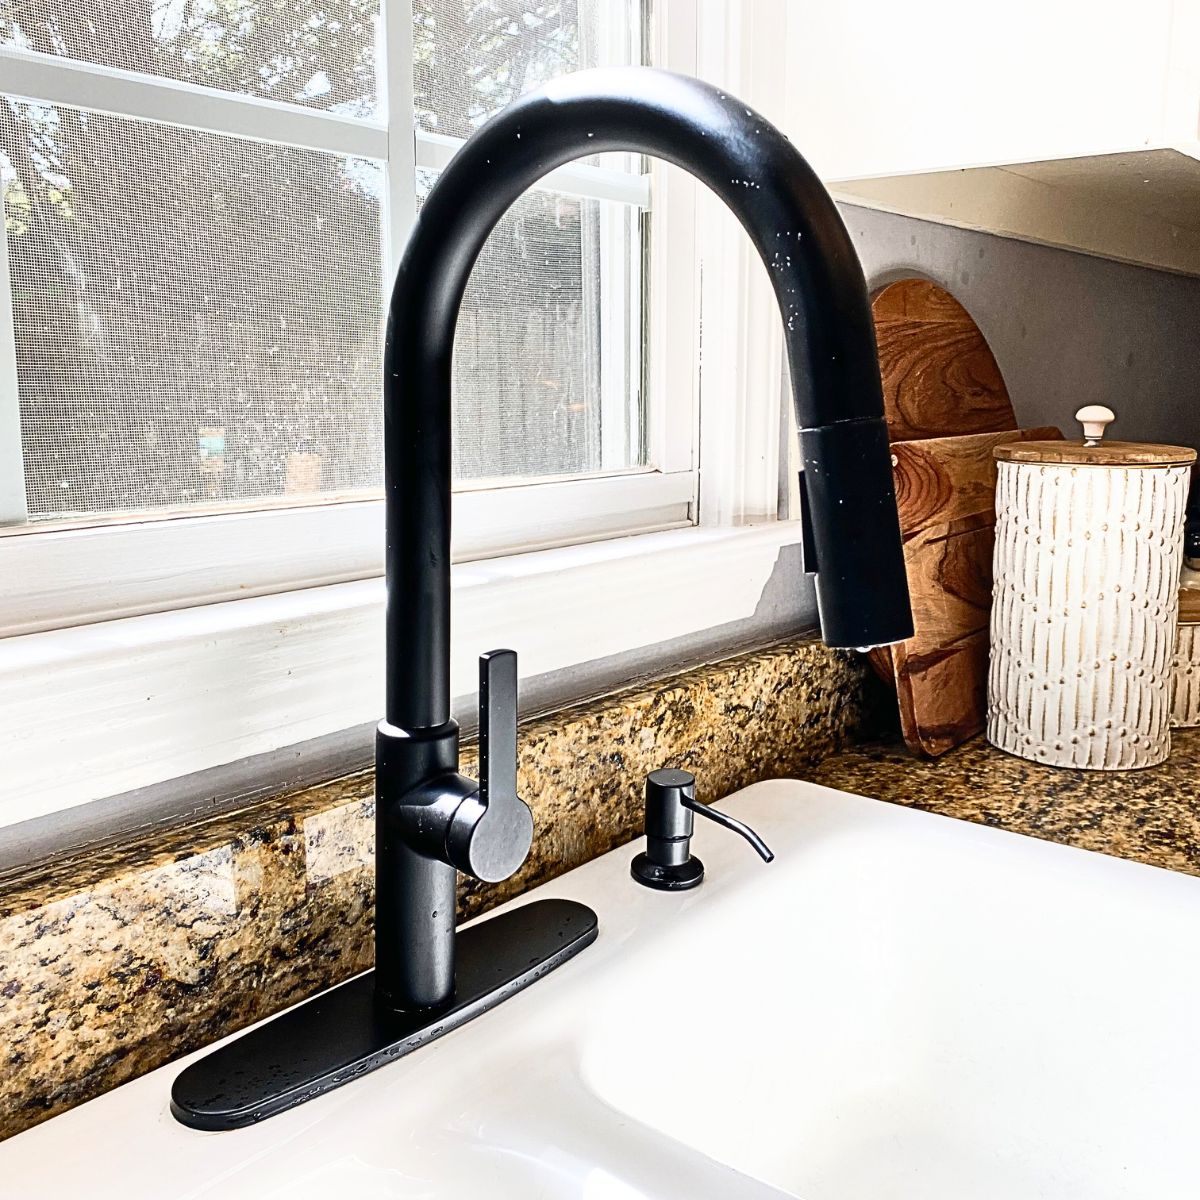 How to Install a Kitchen Sink Faucet Without a Plumber